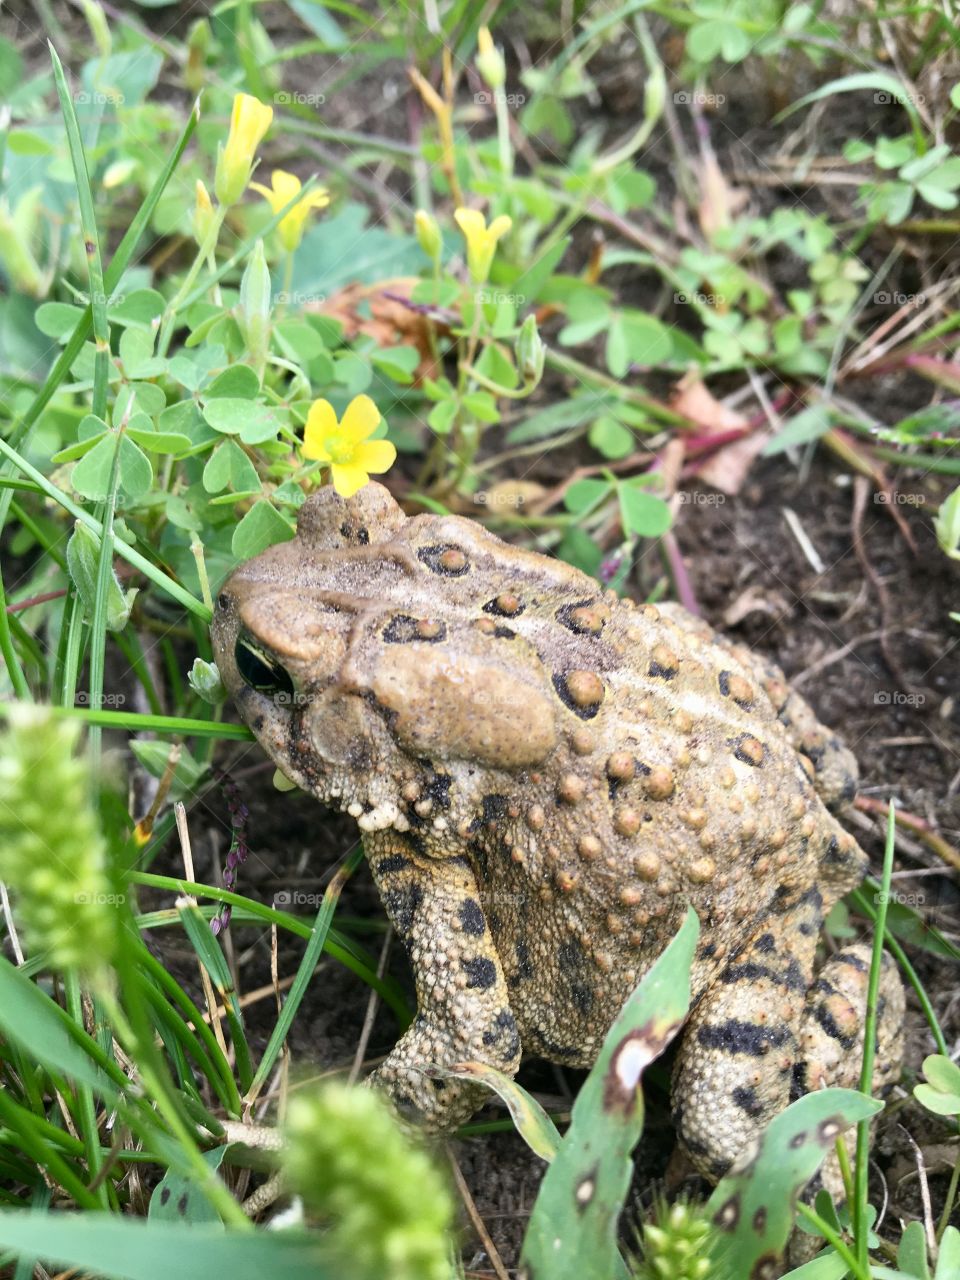 A toad sitting on the ground in my backyard. He has a yellow flower over his right eye. The picture is so clear you can see all his coloration and skin texture. The grass and weeds are very lush and bright green.